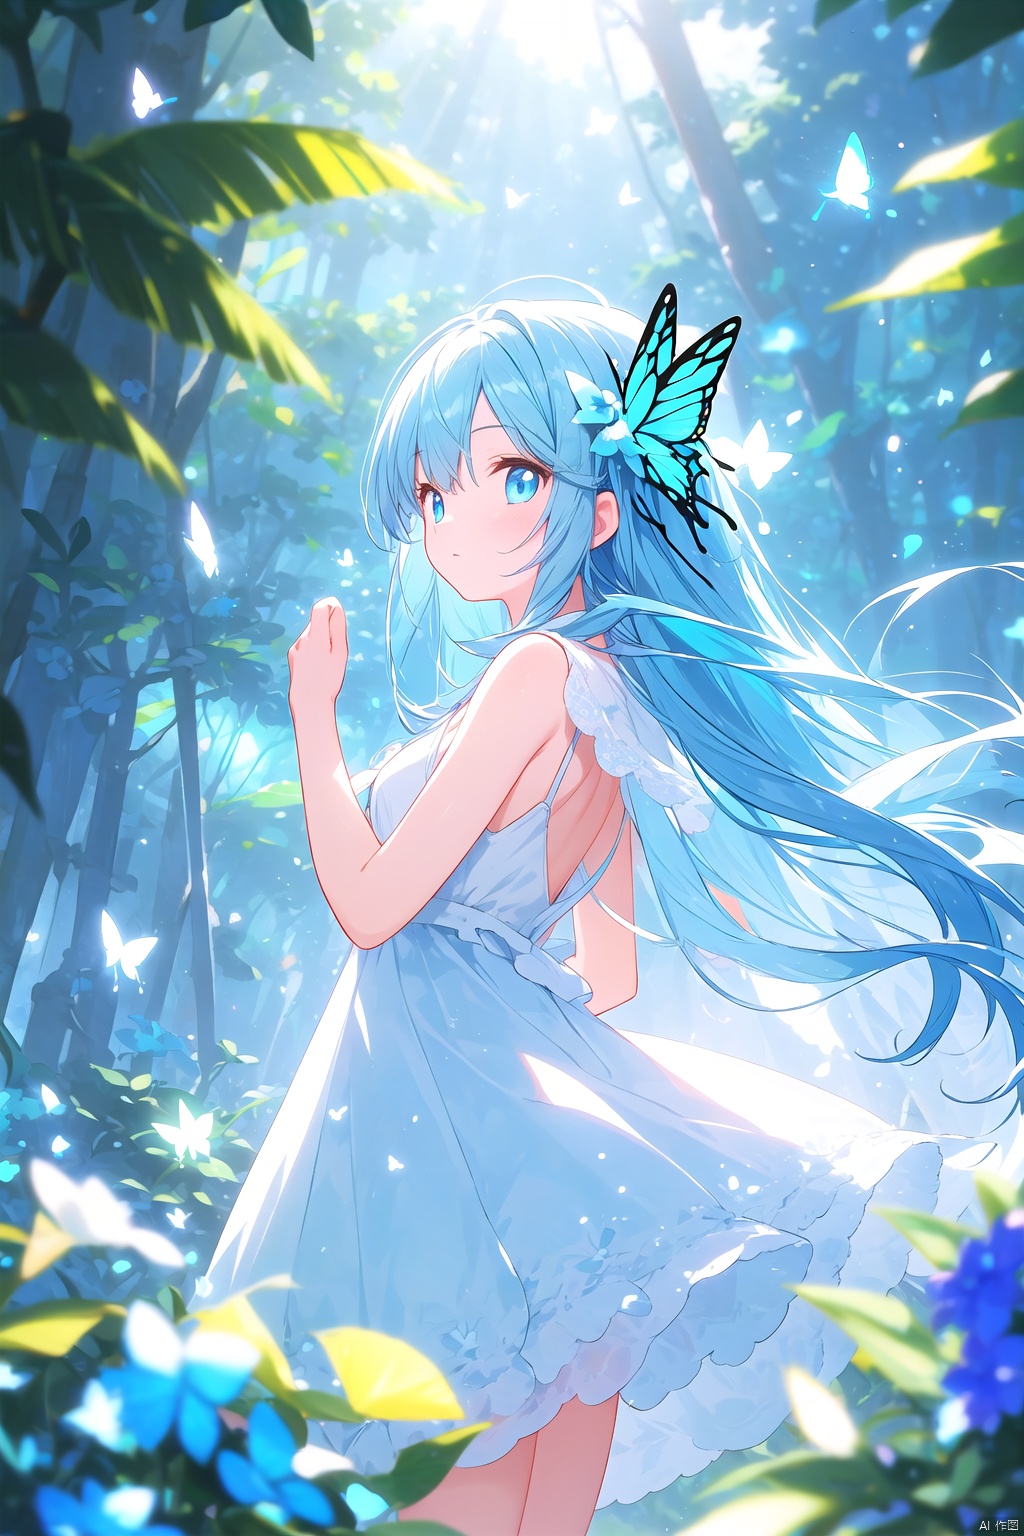 wide shot,(depth of field),global illumination,soft shadows,grand scene,backlight,lens flare,((colorful refraction)),((cinematic lighting)),forest,from side,looking outside,with butterfly,1girl with lightblue long hair and blue aqua eyes,hair flowers,hime cut,sunlight,blurry background,blurry,white dress,